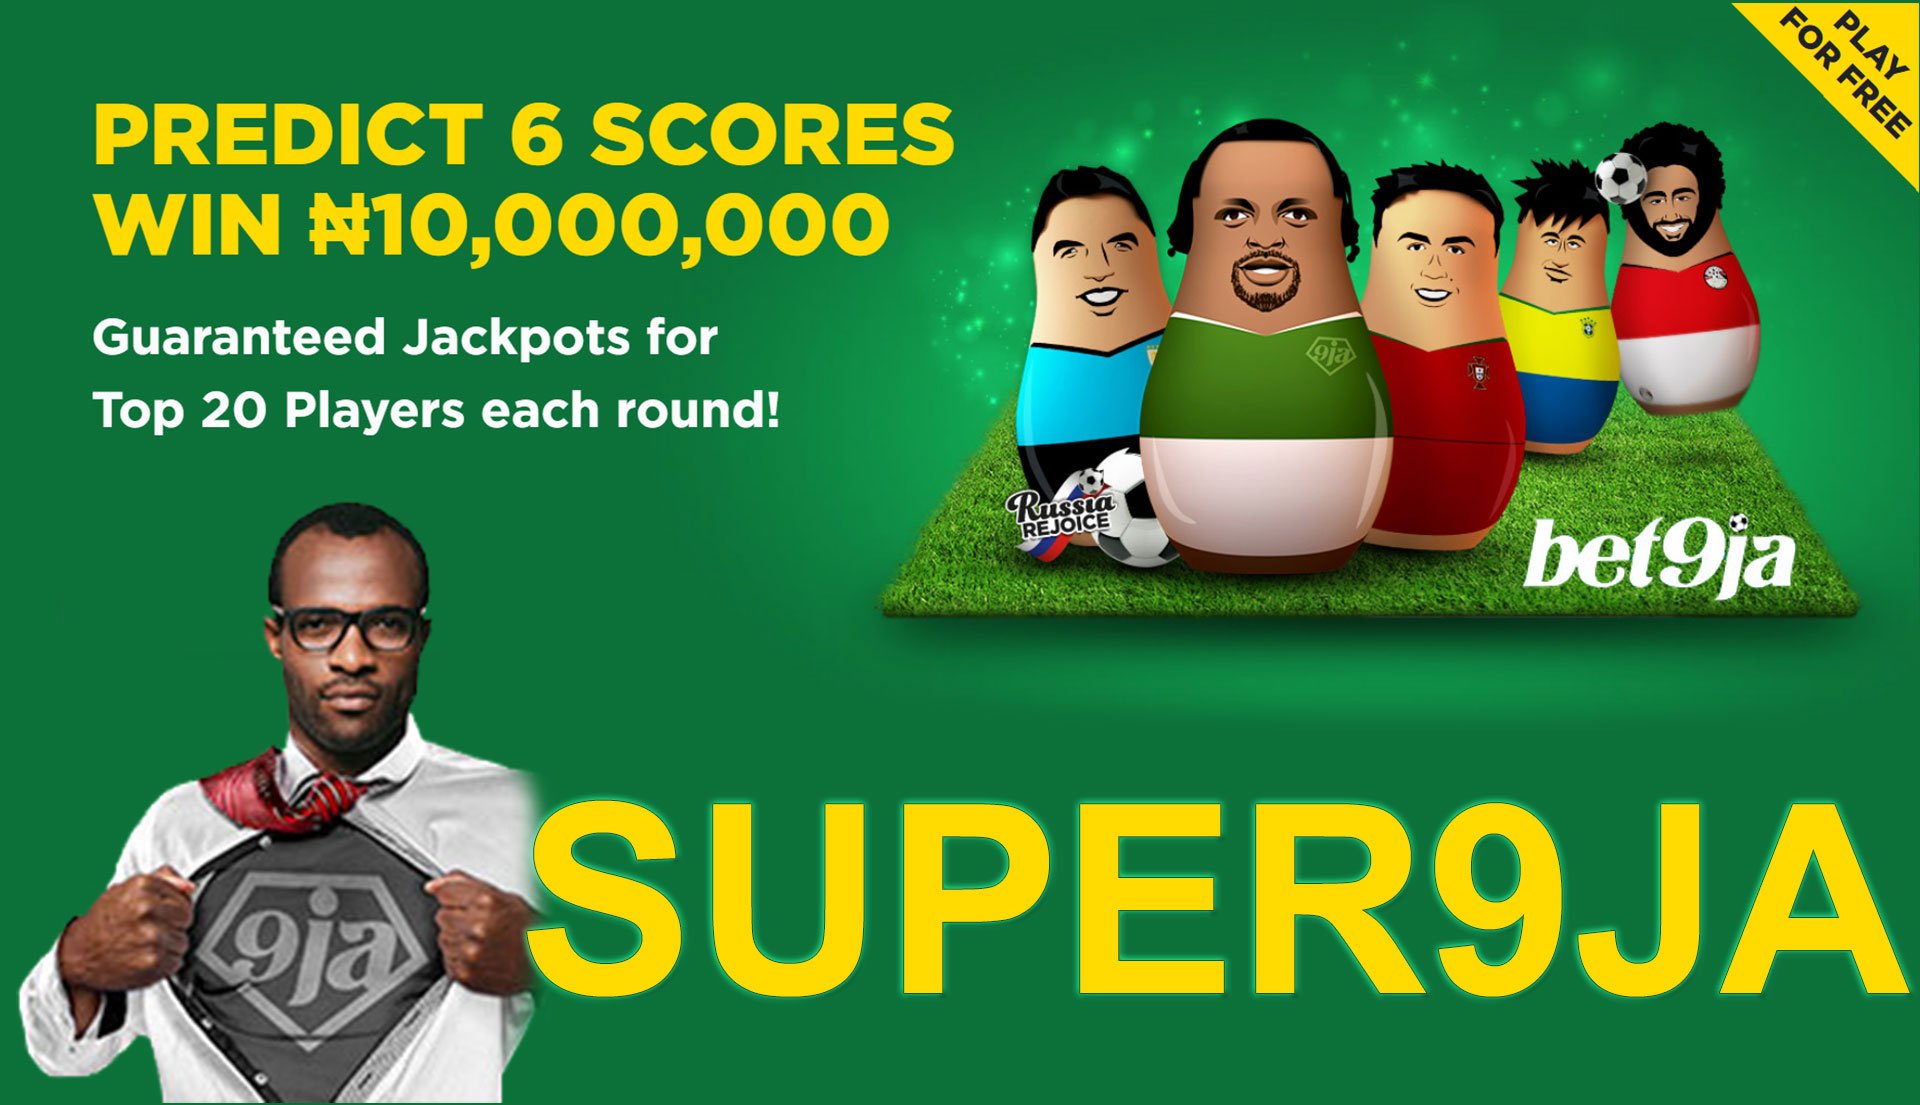 Predict 6 Scores to WIN ₦10,000,000 FREE to enter with Guaranteed Jackpots for the Top 20 Players each round!